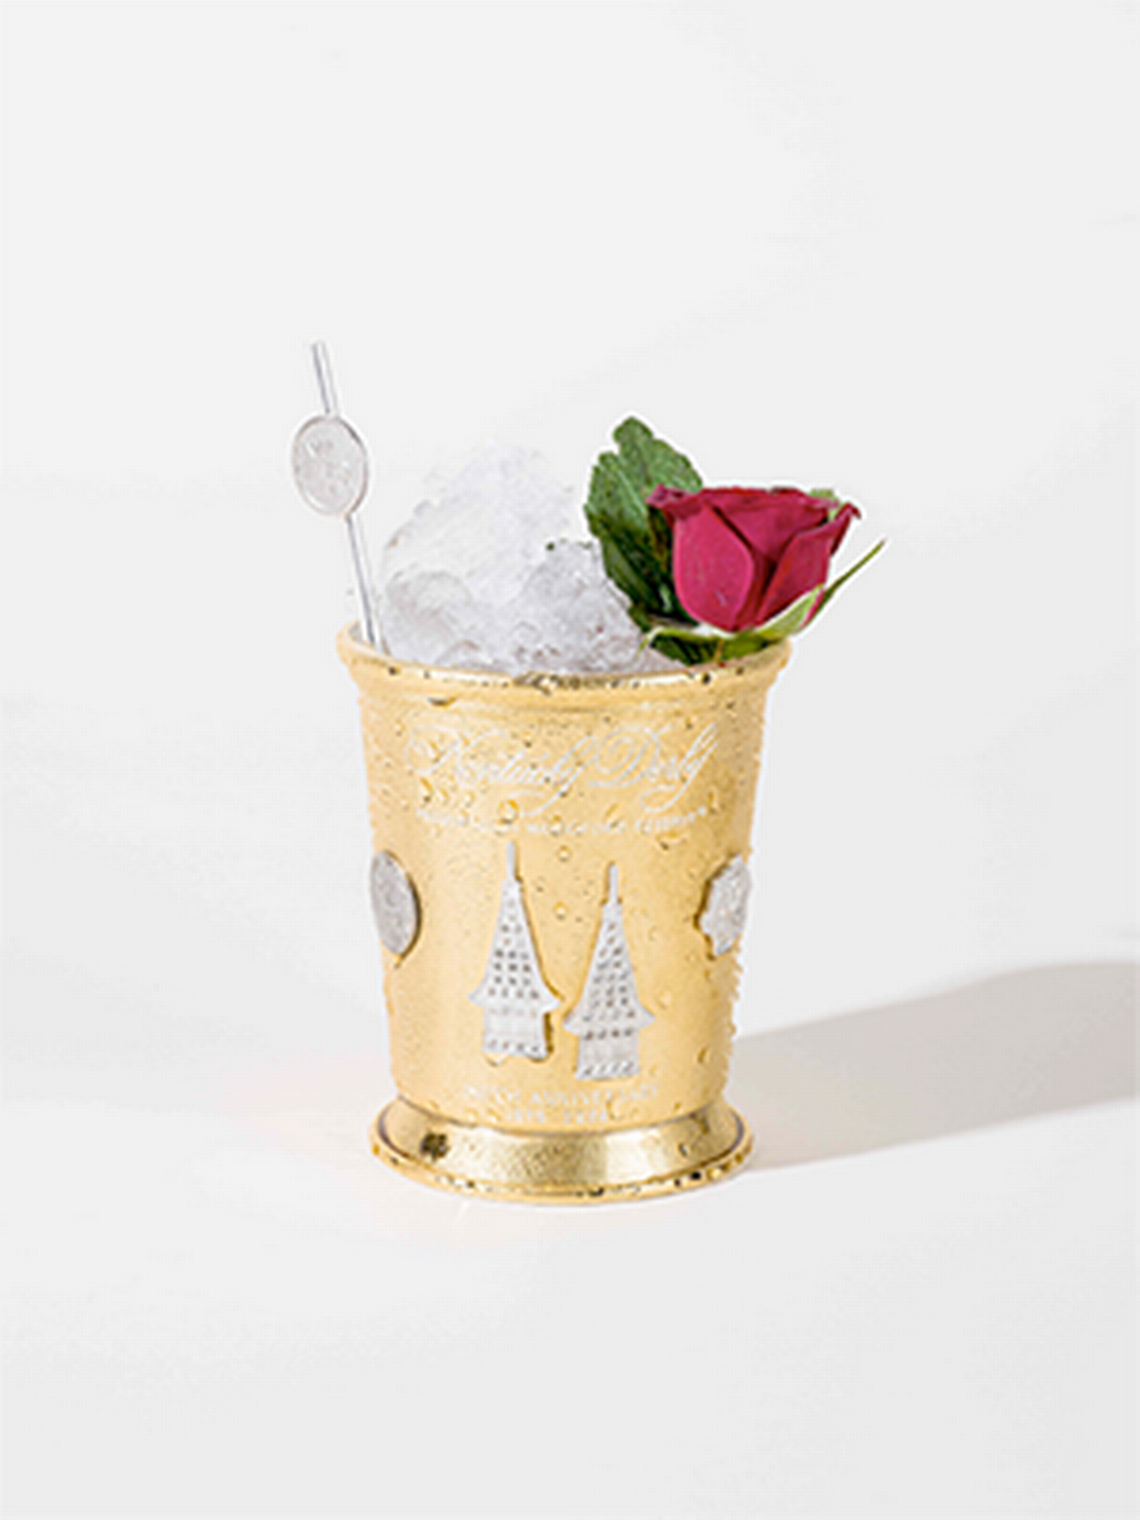 This year there are special gold mint julep cups available for $5,000 at the Woodford Reserve $1,000 Mint Julep Cup Experience at Churchill Downs on Oaks Day on May 3 or Kentucky Derby Day on May 4.